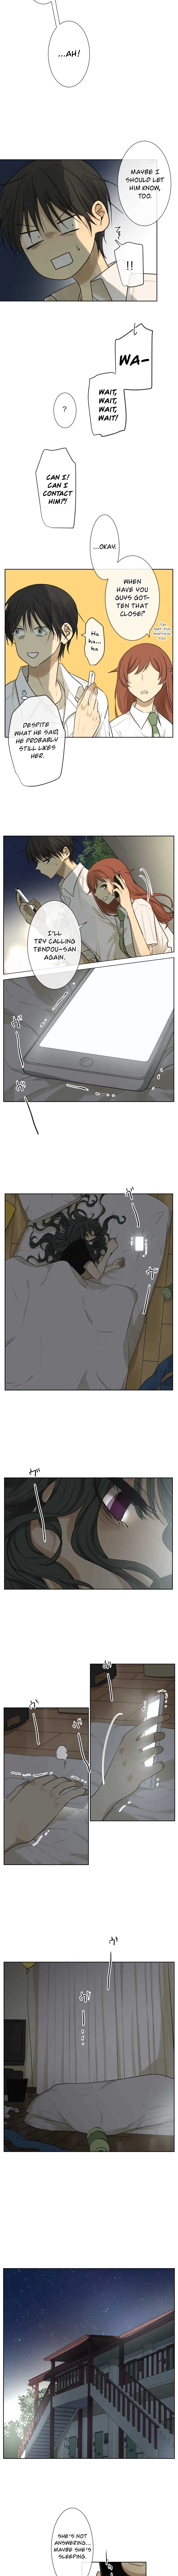 KAKAO 79% Ch. 160 Uninvited Guests (1)